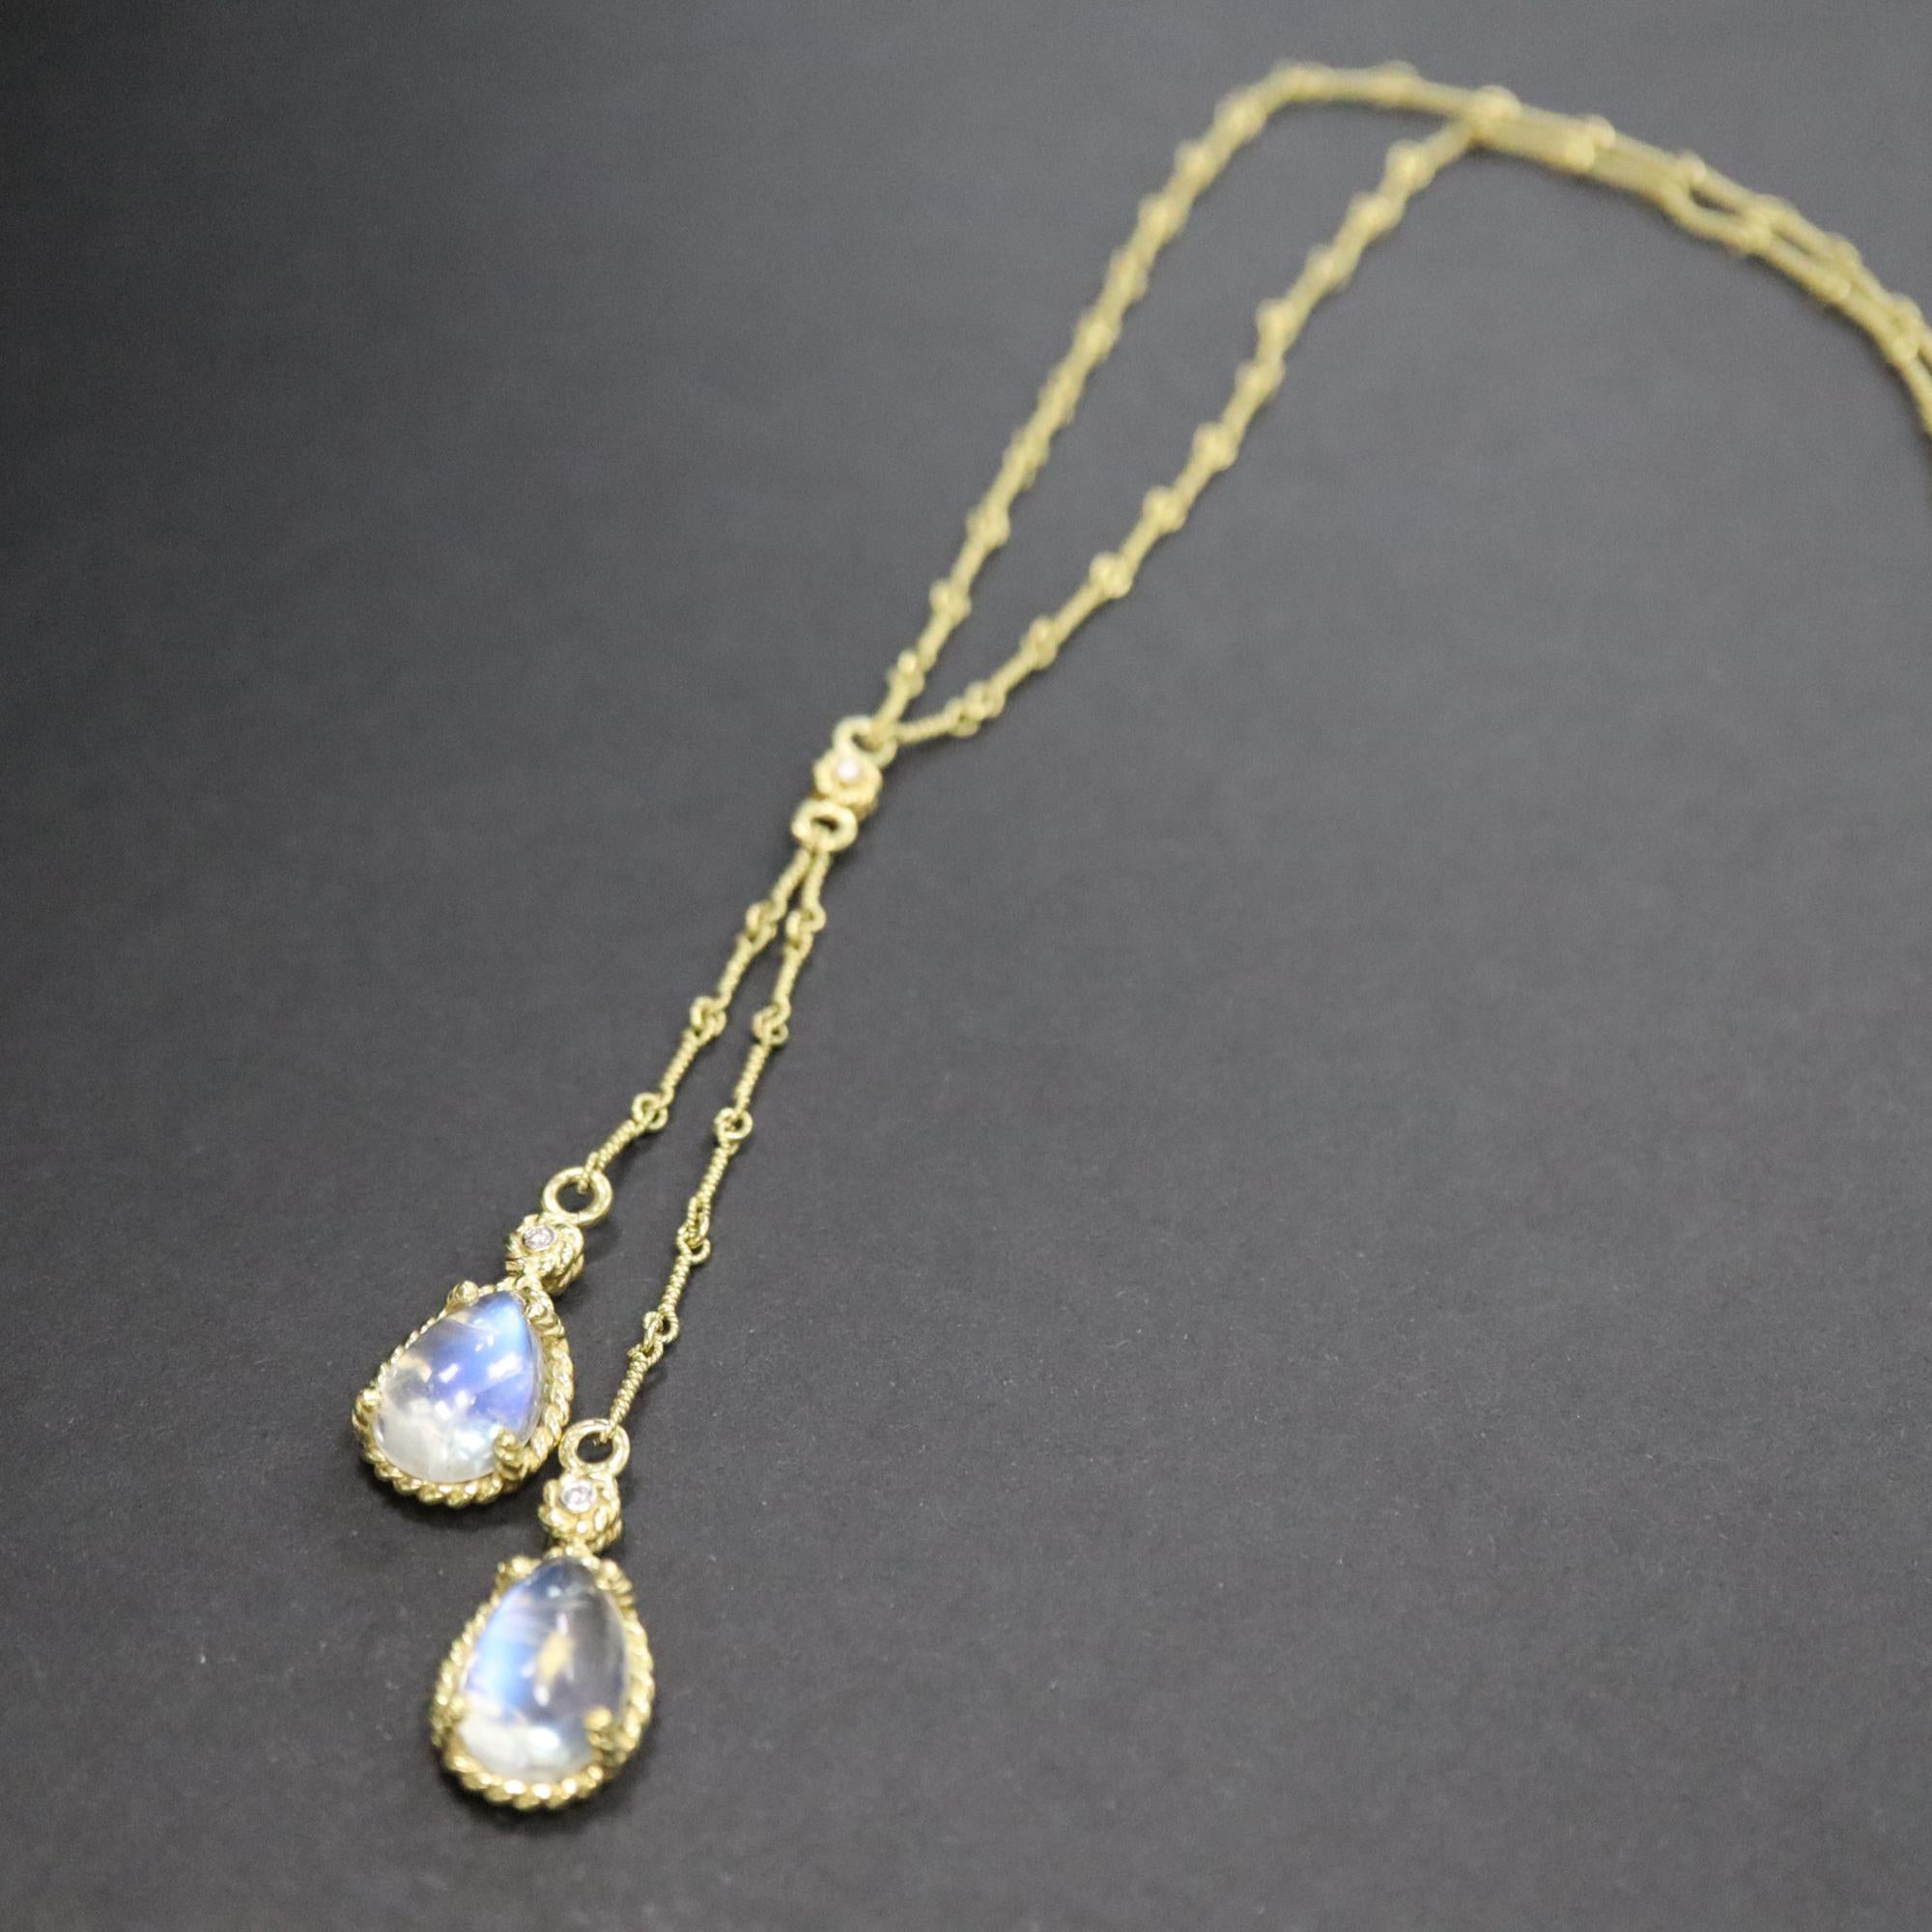 This beautiful Cassis Natural Diamond And Moonstone Lariette Necklace is crafted in 18K yellow gold with 3 white diamonds and 2 clear blue moonstones. The length of the necklace is 12 inches with total weight 12.8 g. Comes with a gift box and an